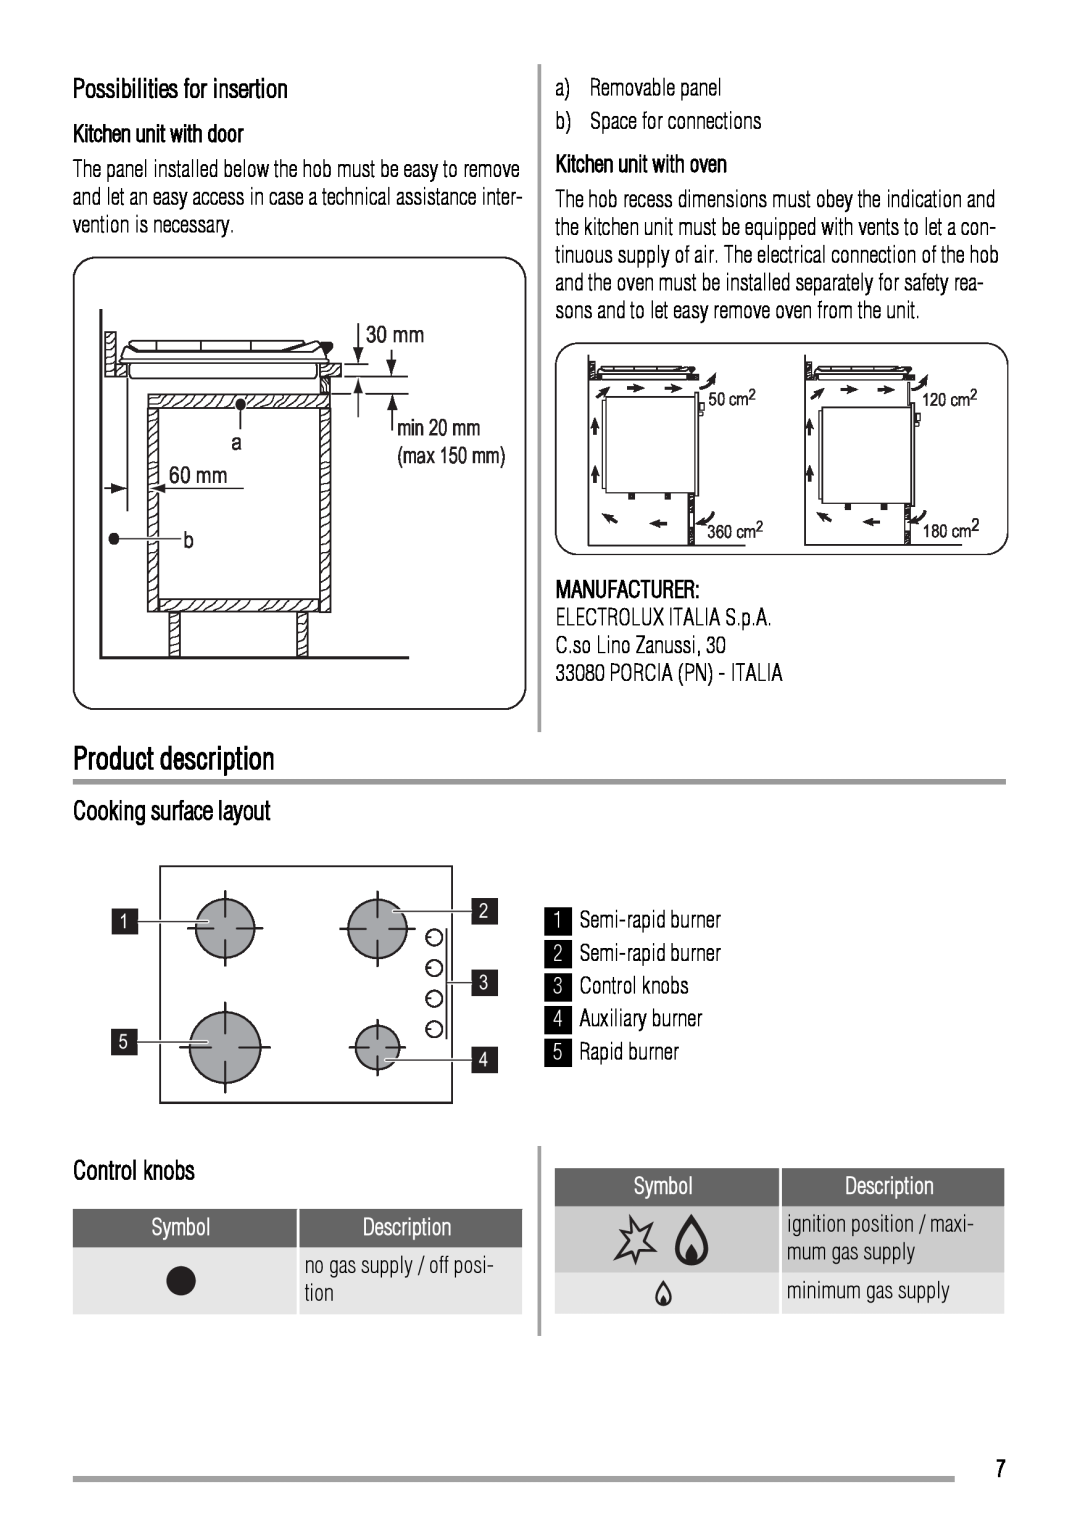 Zanussi ZGL62IT Product description, Possibilities for insertion, Cooking surface layout, Control knobs, Manufacturer 